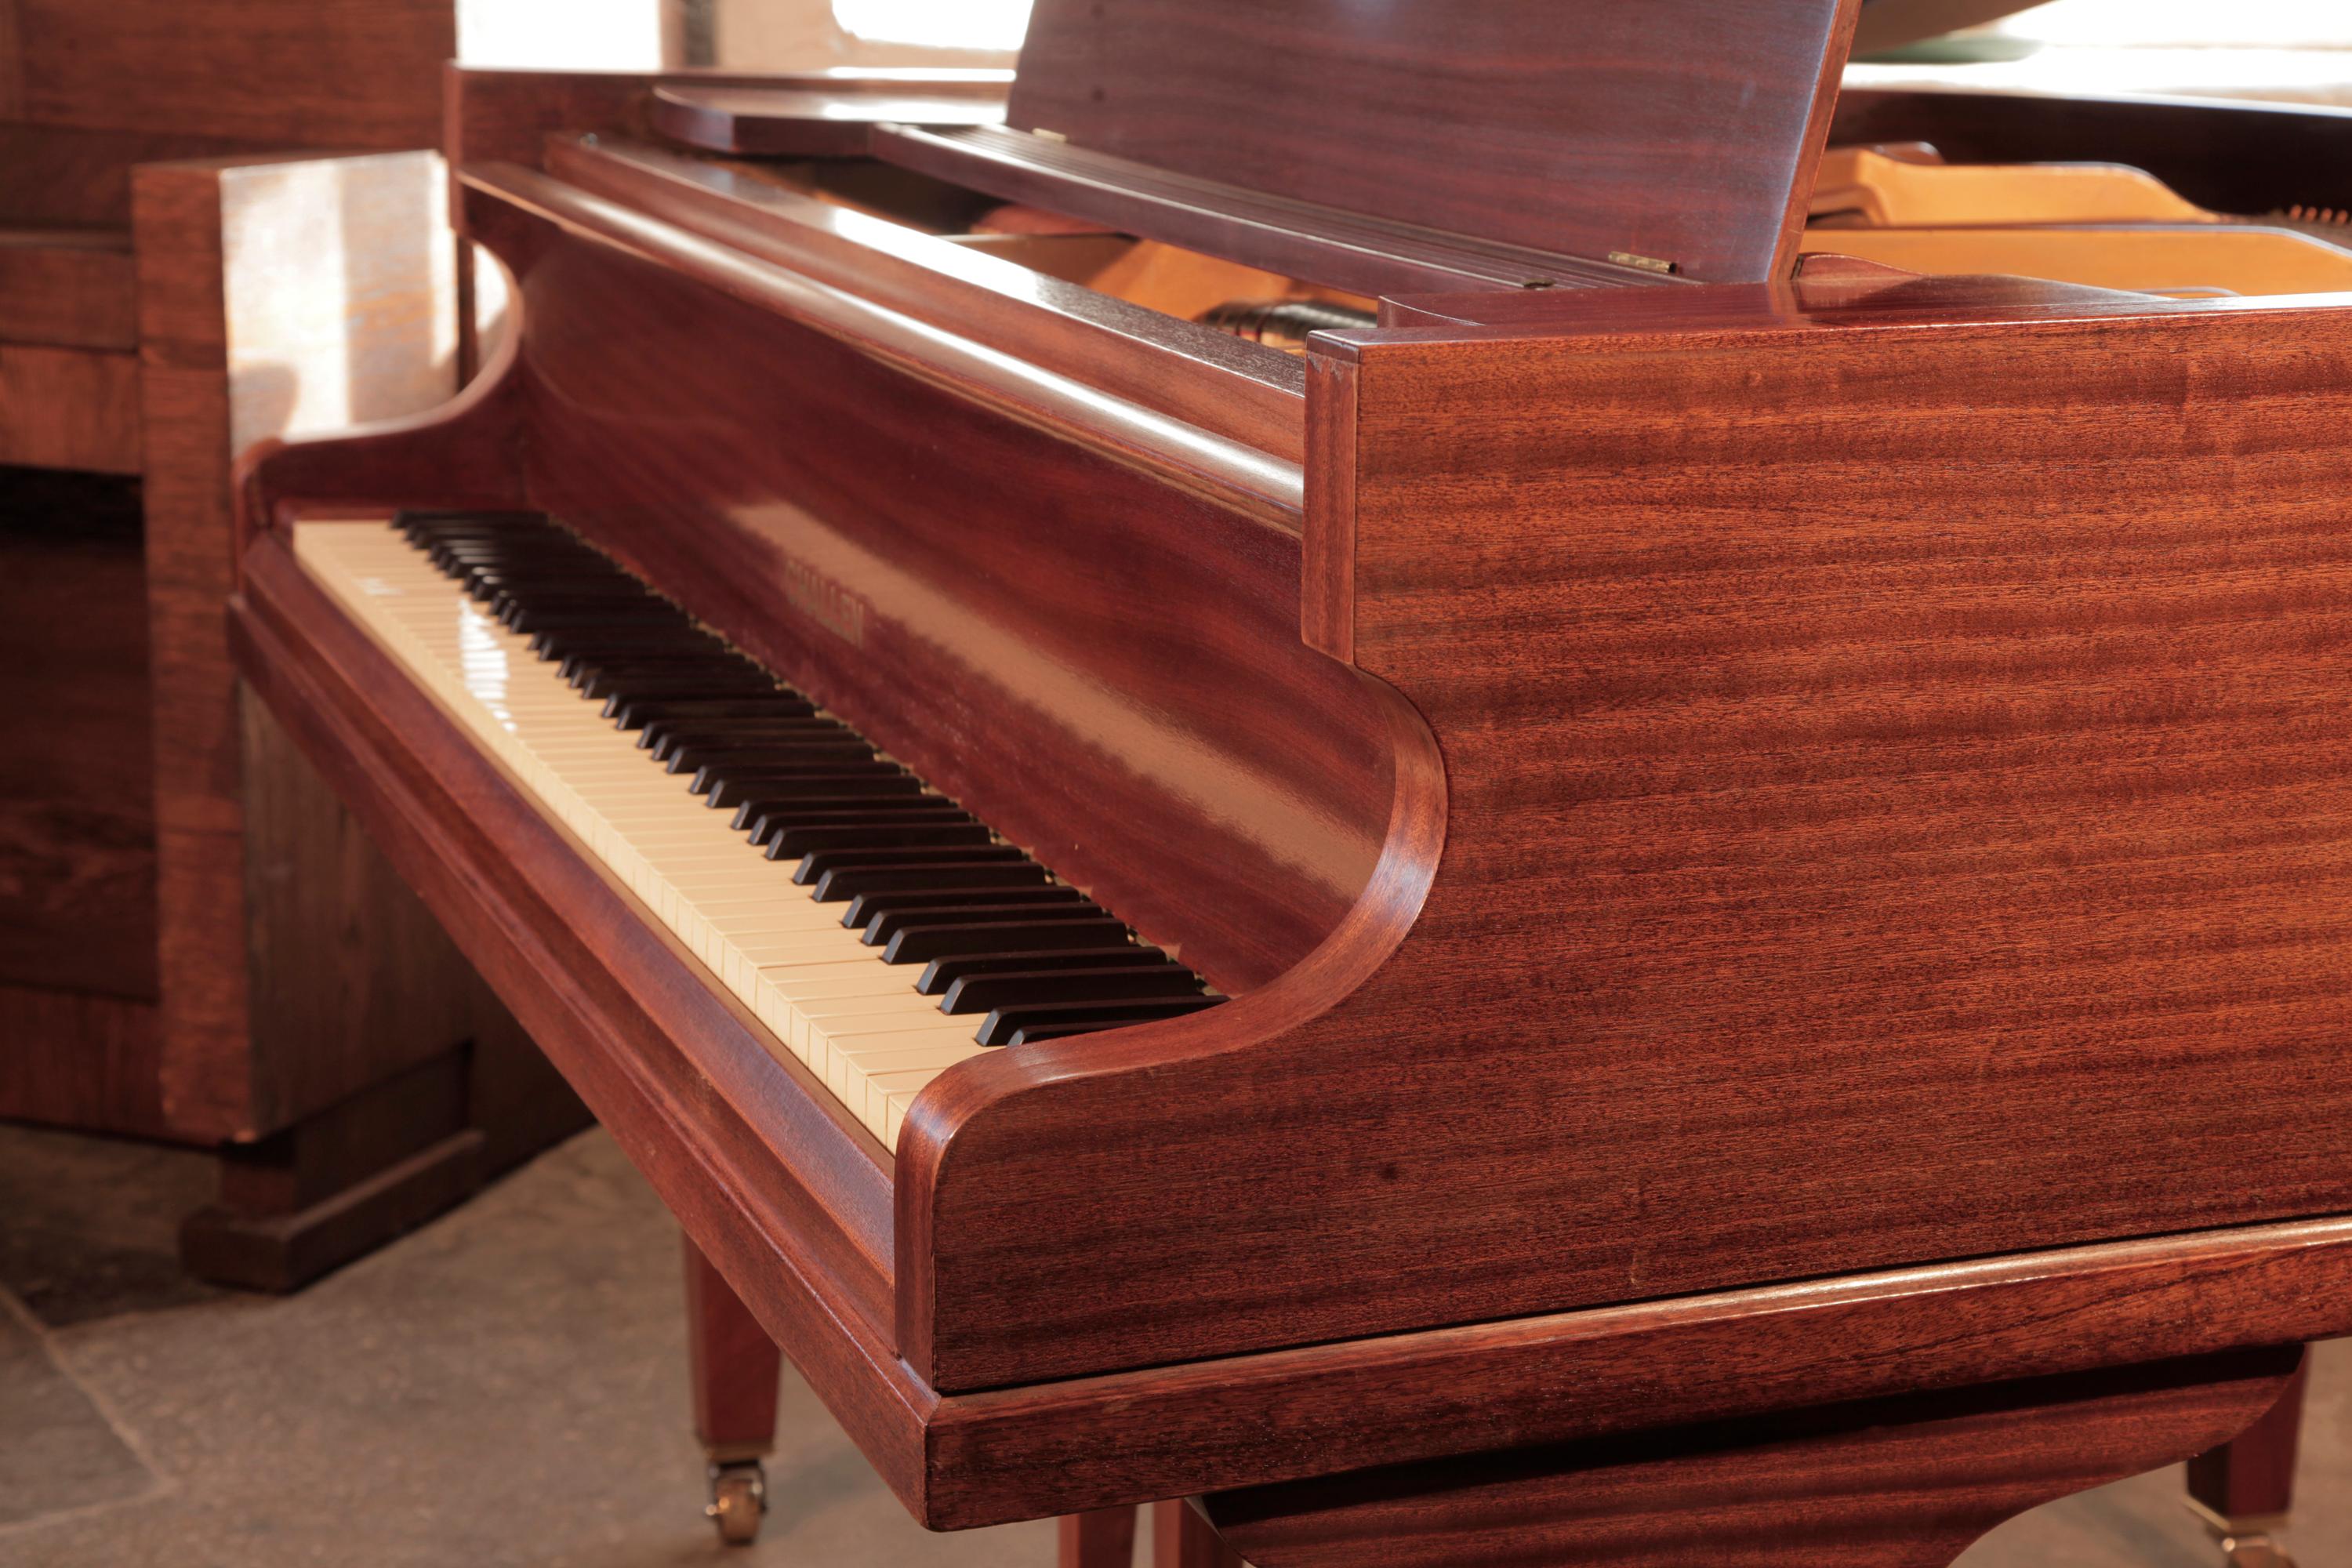 A 1936, Challen baby grand piano with a mahogany case. Piano formerly the property of Hurricane Smith, studio engineer for The Beatles and Pink Floyd.
Piano ideal for a smaller space. Piano has an eighty-eight note keyboard and a two-pedal piano